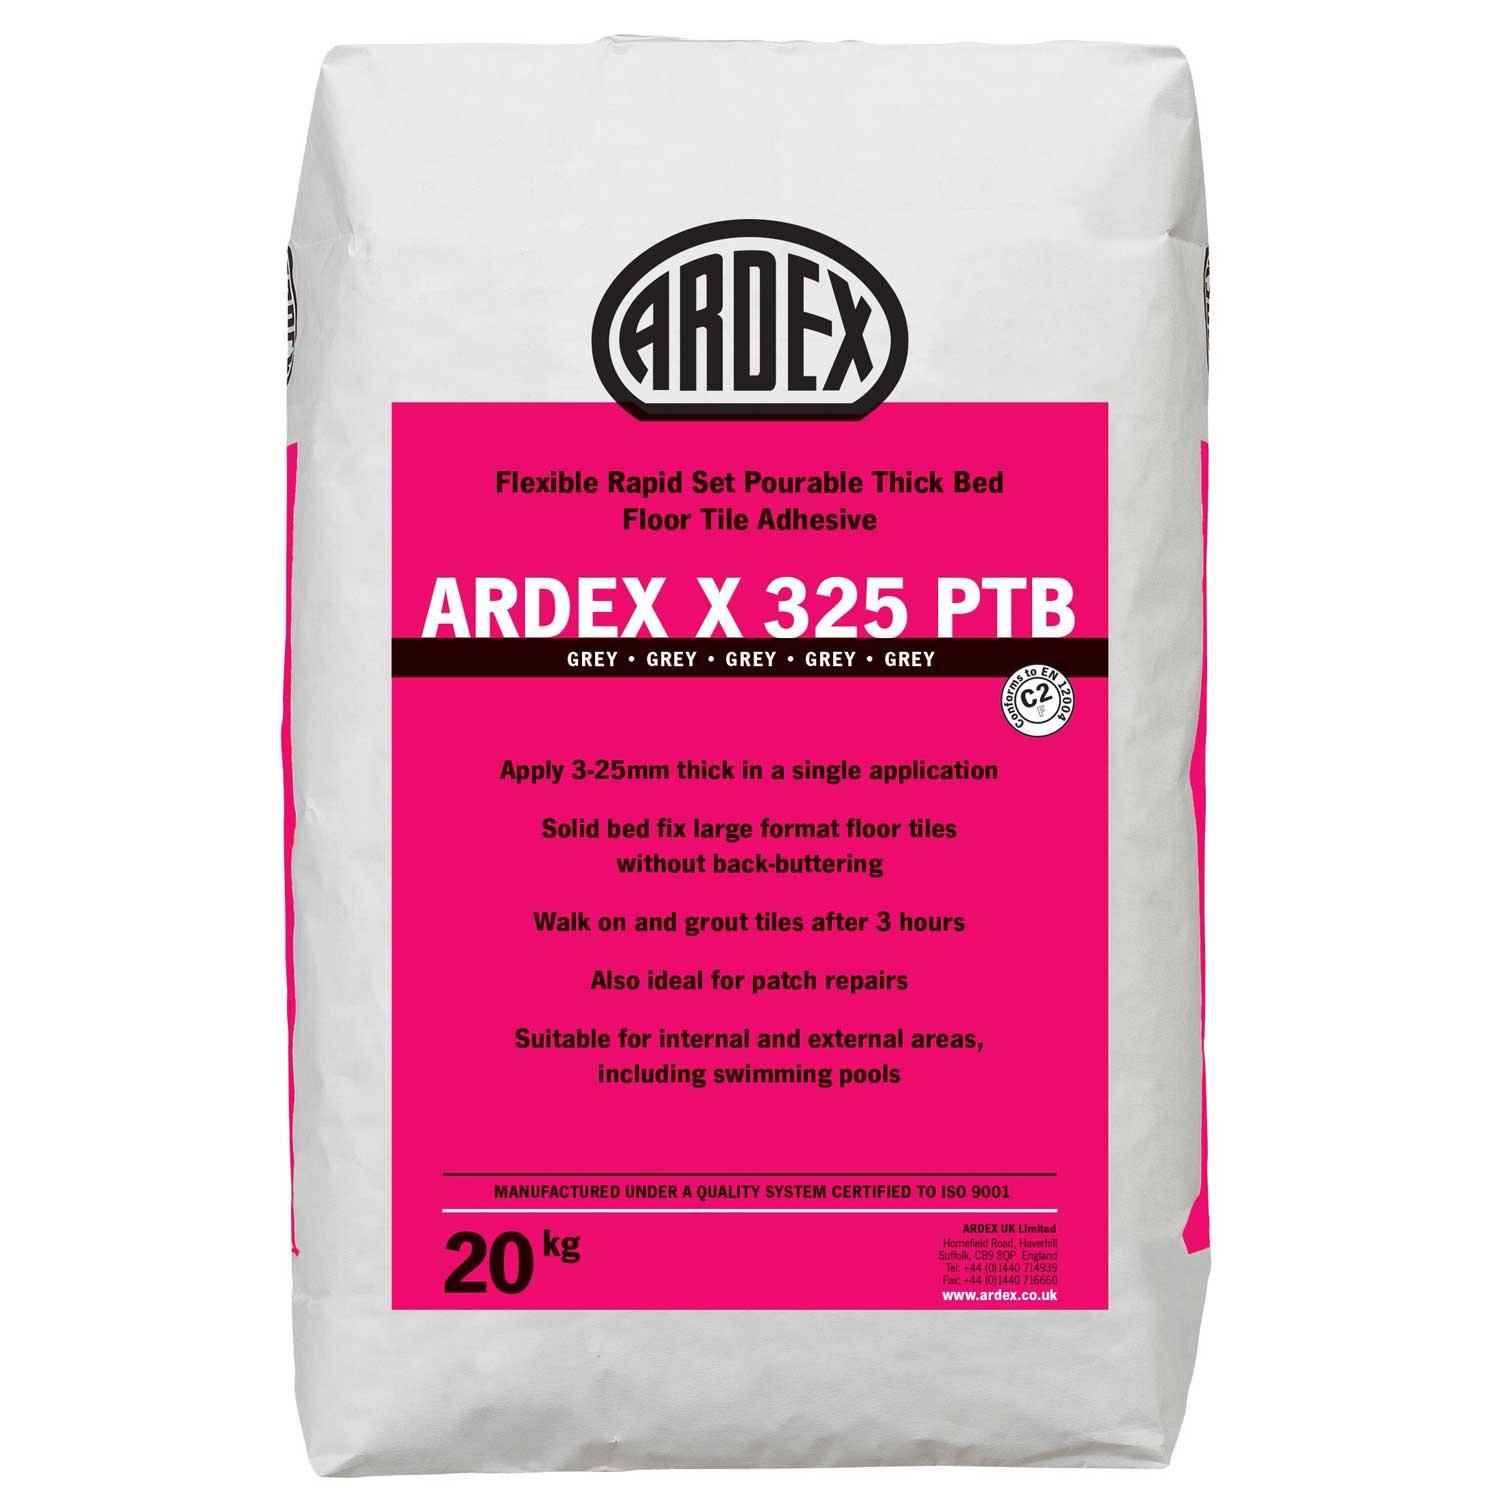 Ardex X325 Thick Bed Foor Tile Adhesive -Grey 20kg